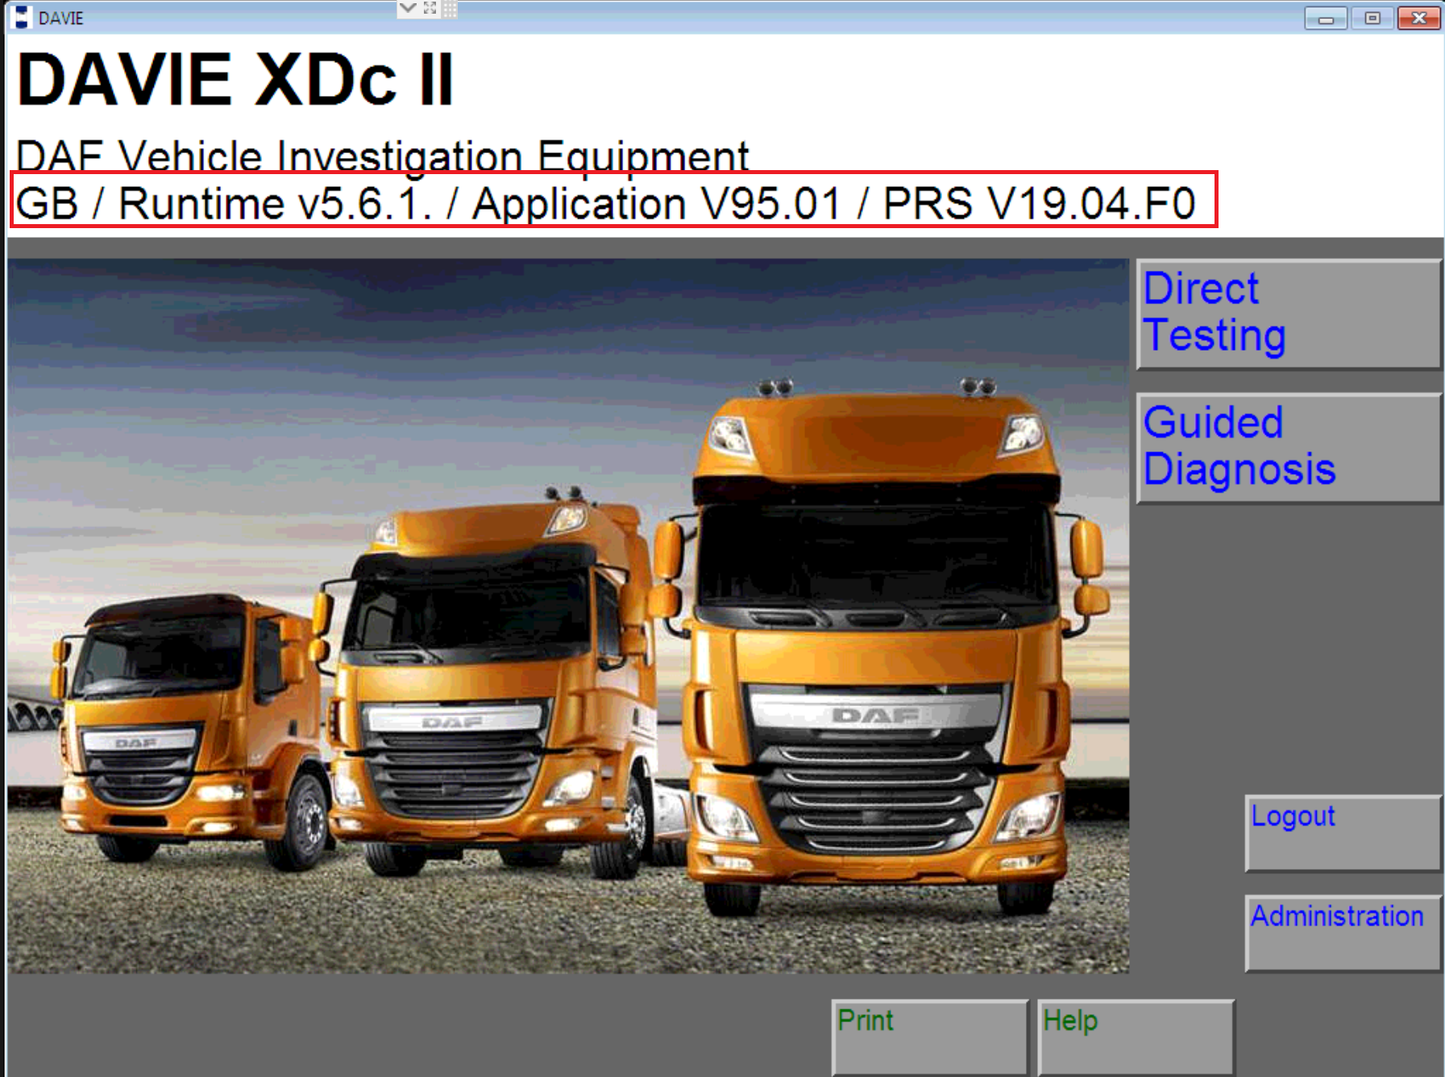 
                  
                    DAF / PACCAR VCI-560 Interface & Davie Software KIT - Diagnostic Adapter & Laptop- Include Latest Davie XDc II! Full Online Installation & Support!
                  
                